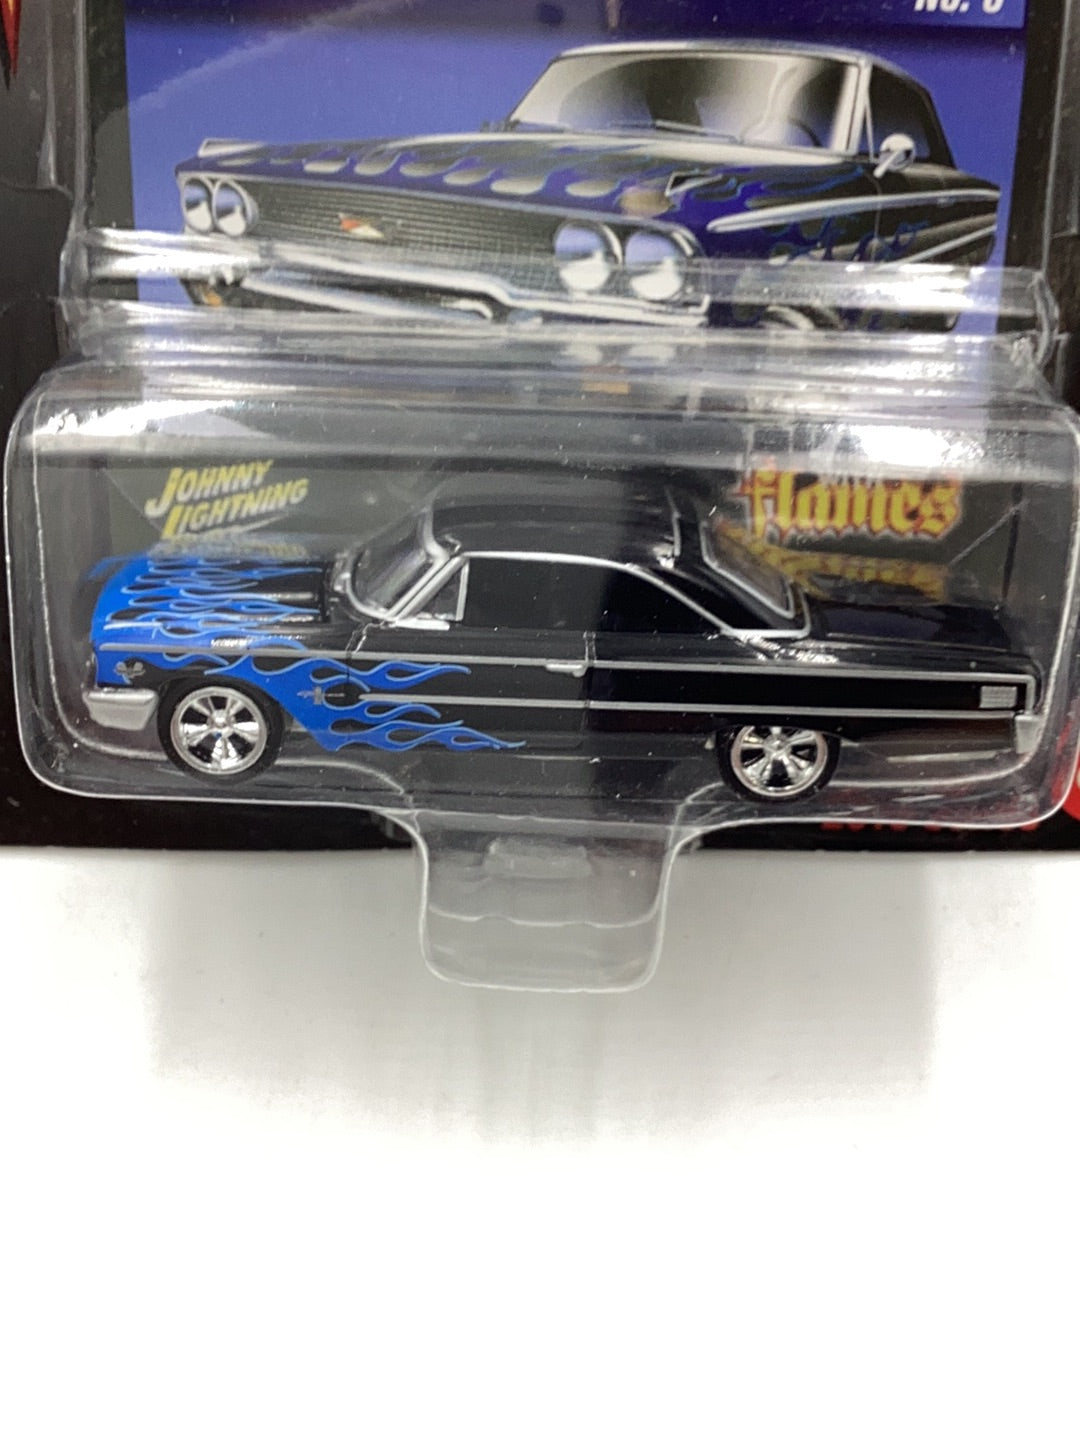 Johnny Lightning Street Freaks - Black With Flames ~ 1963 Ford Galaxie 500 OO3